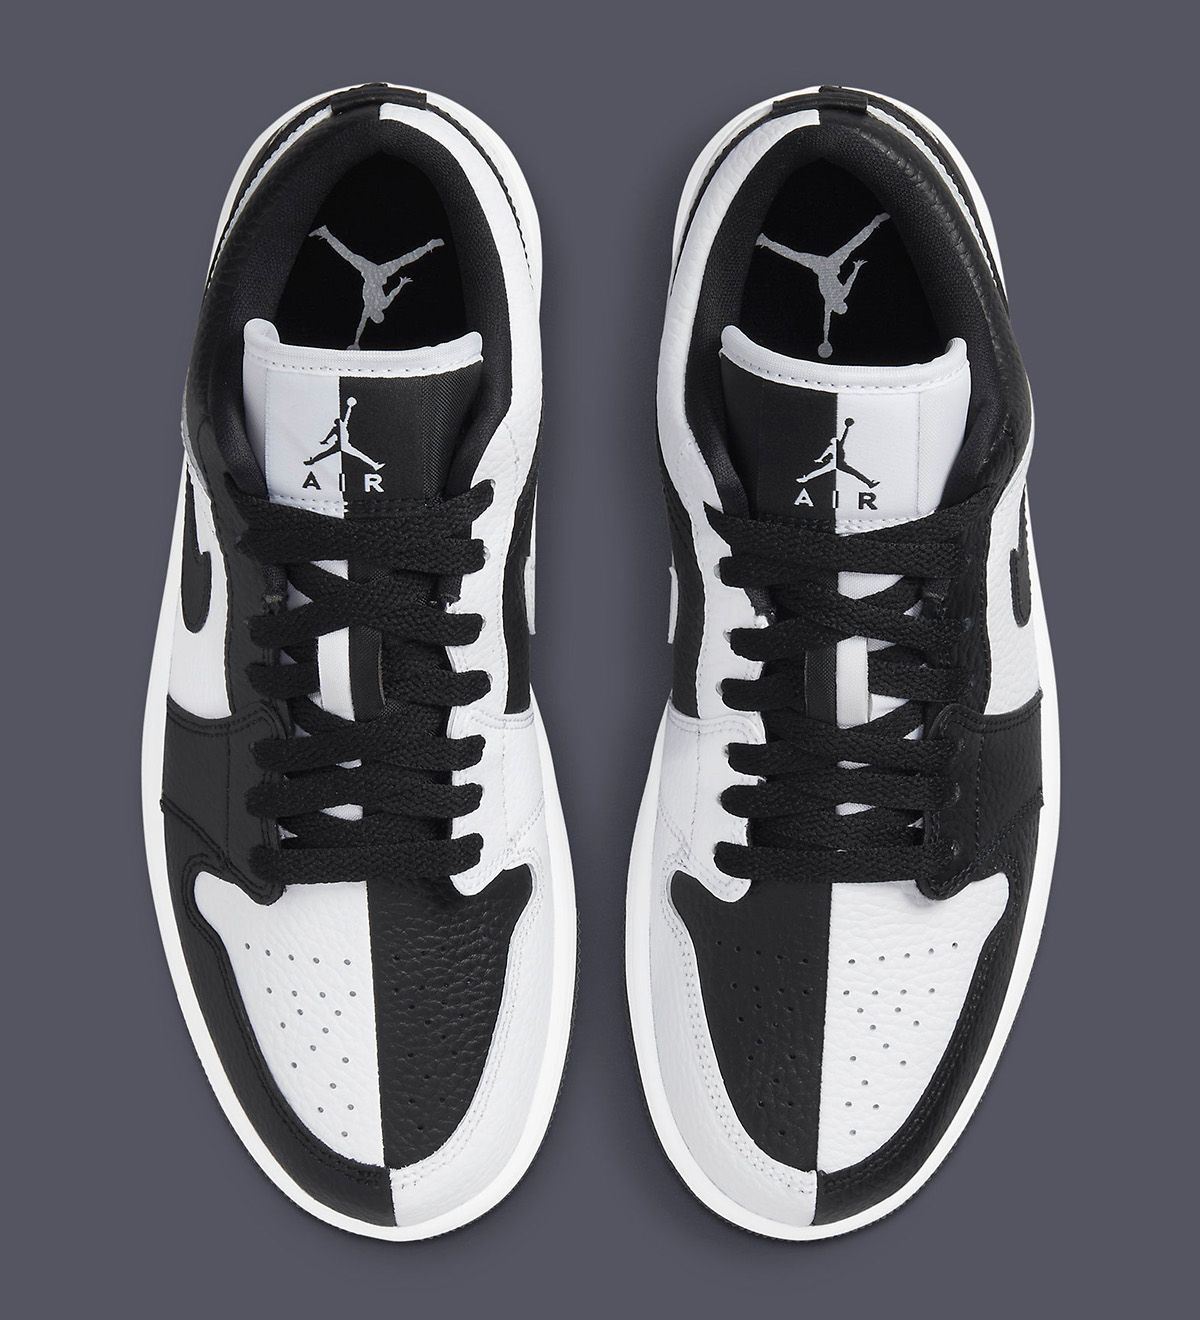 Where to Buy Air 1 Low “Split” (Black/White) | House of Heat°